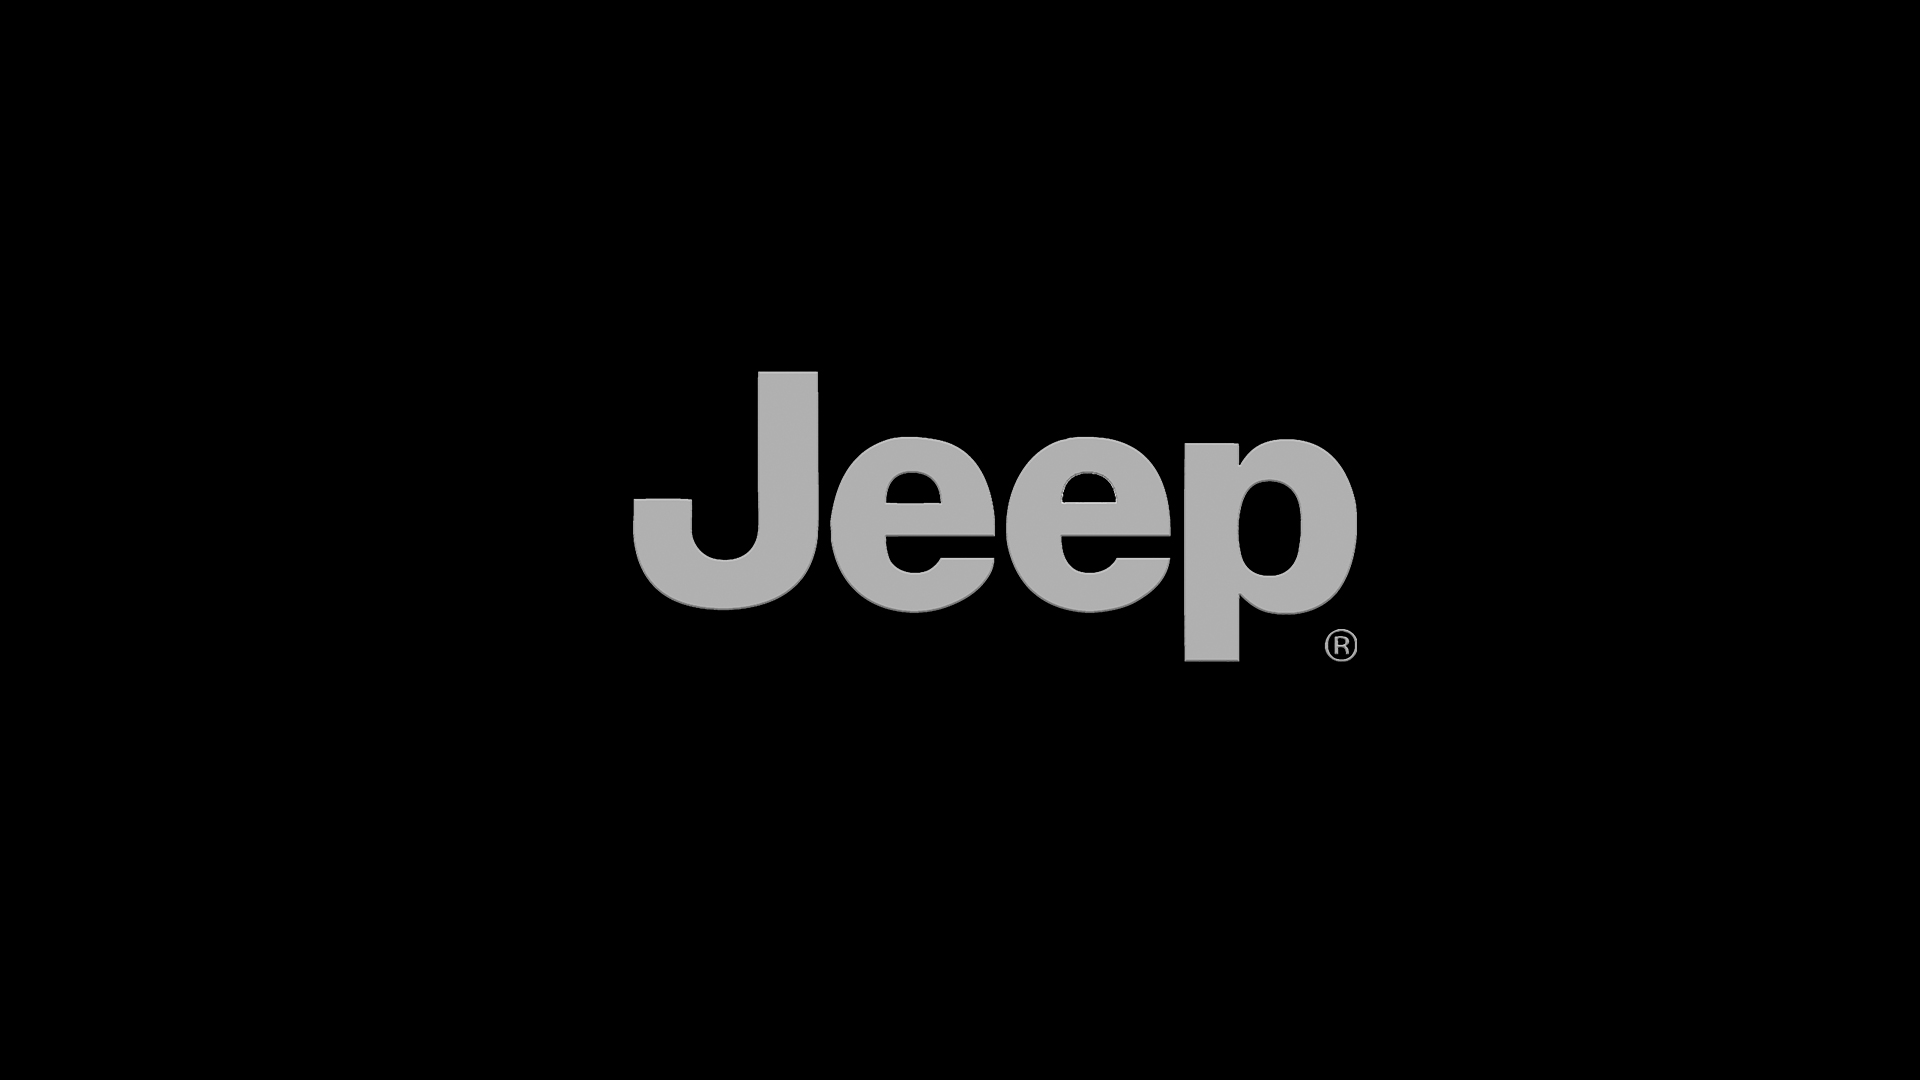 Jeep Logo Wallpapers 1920x1080